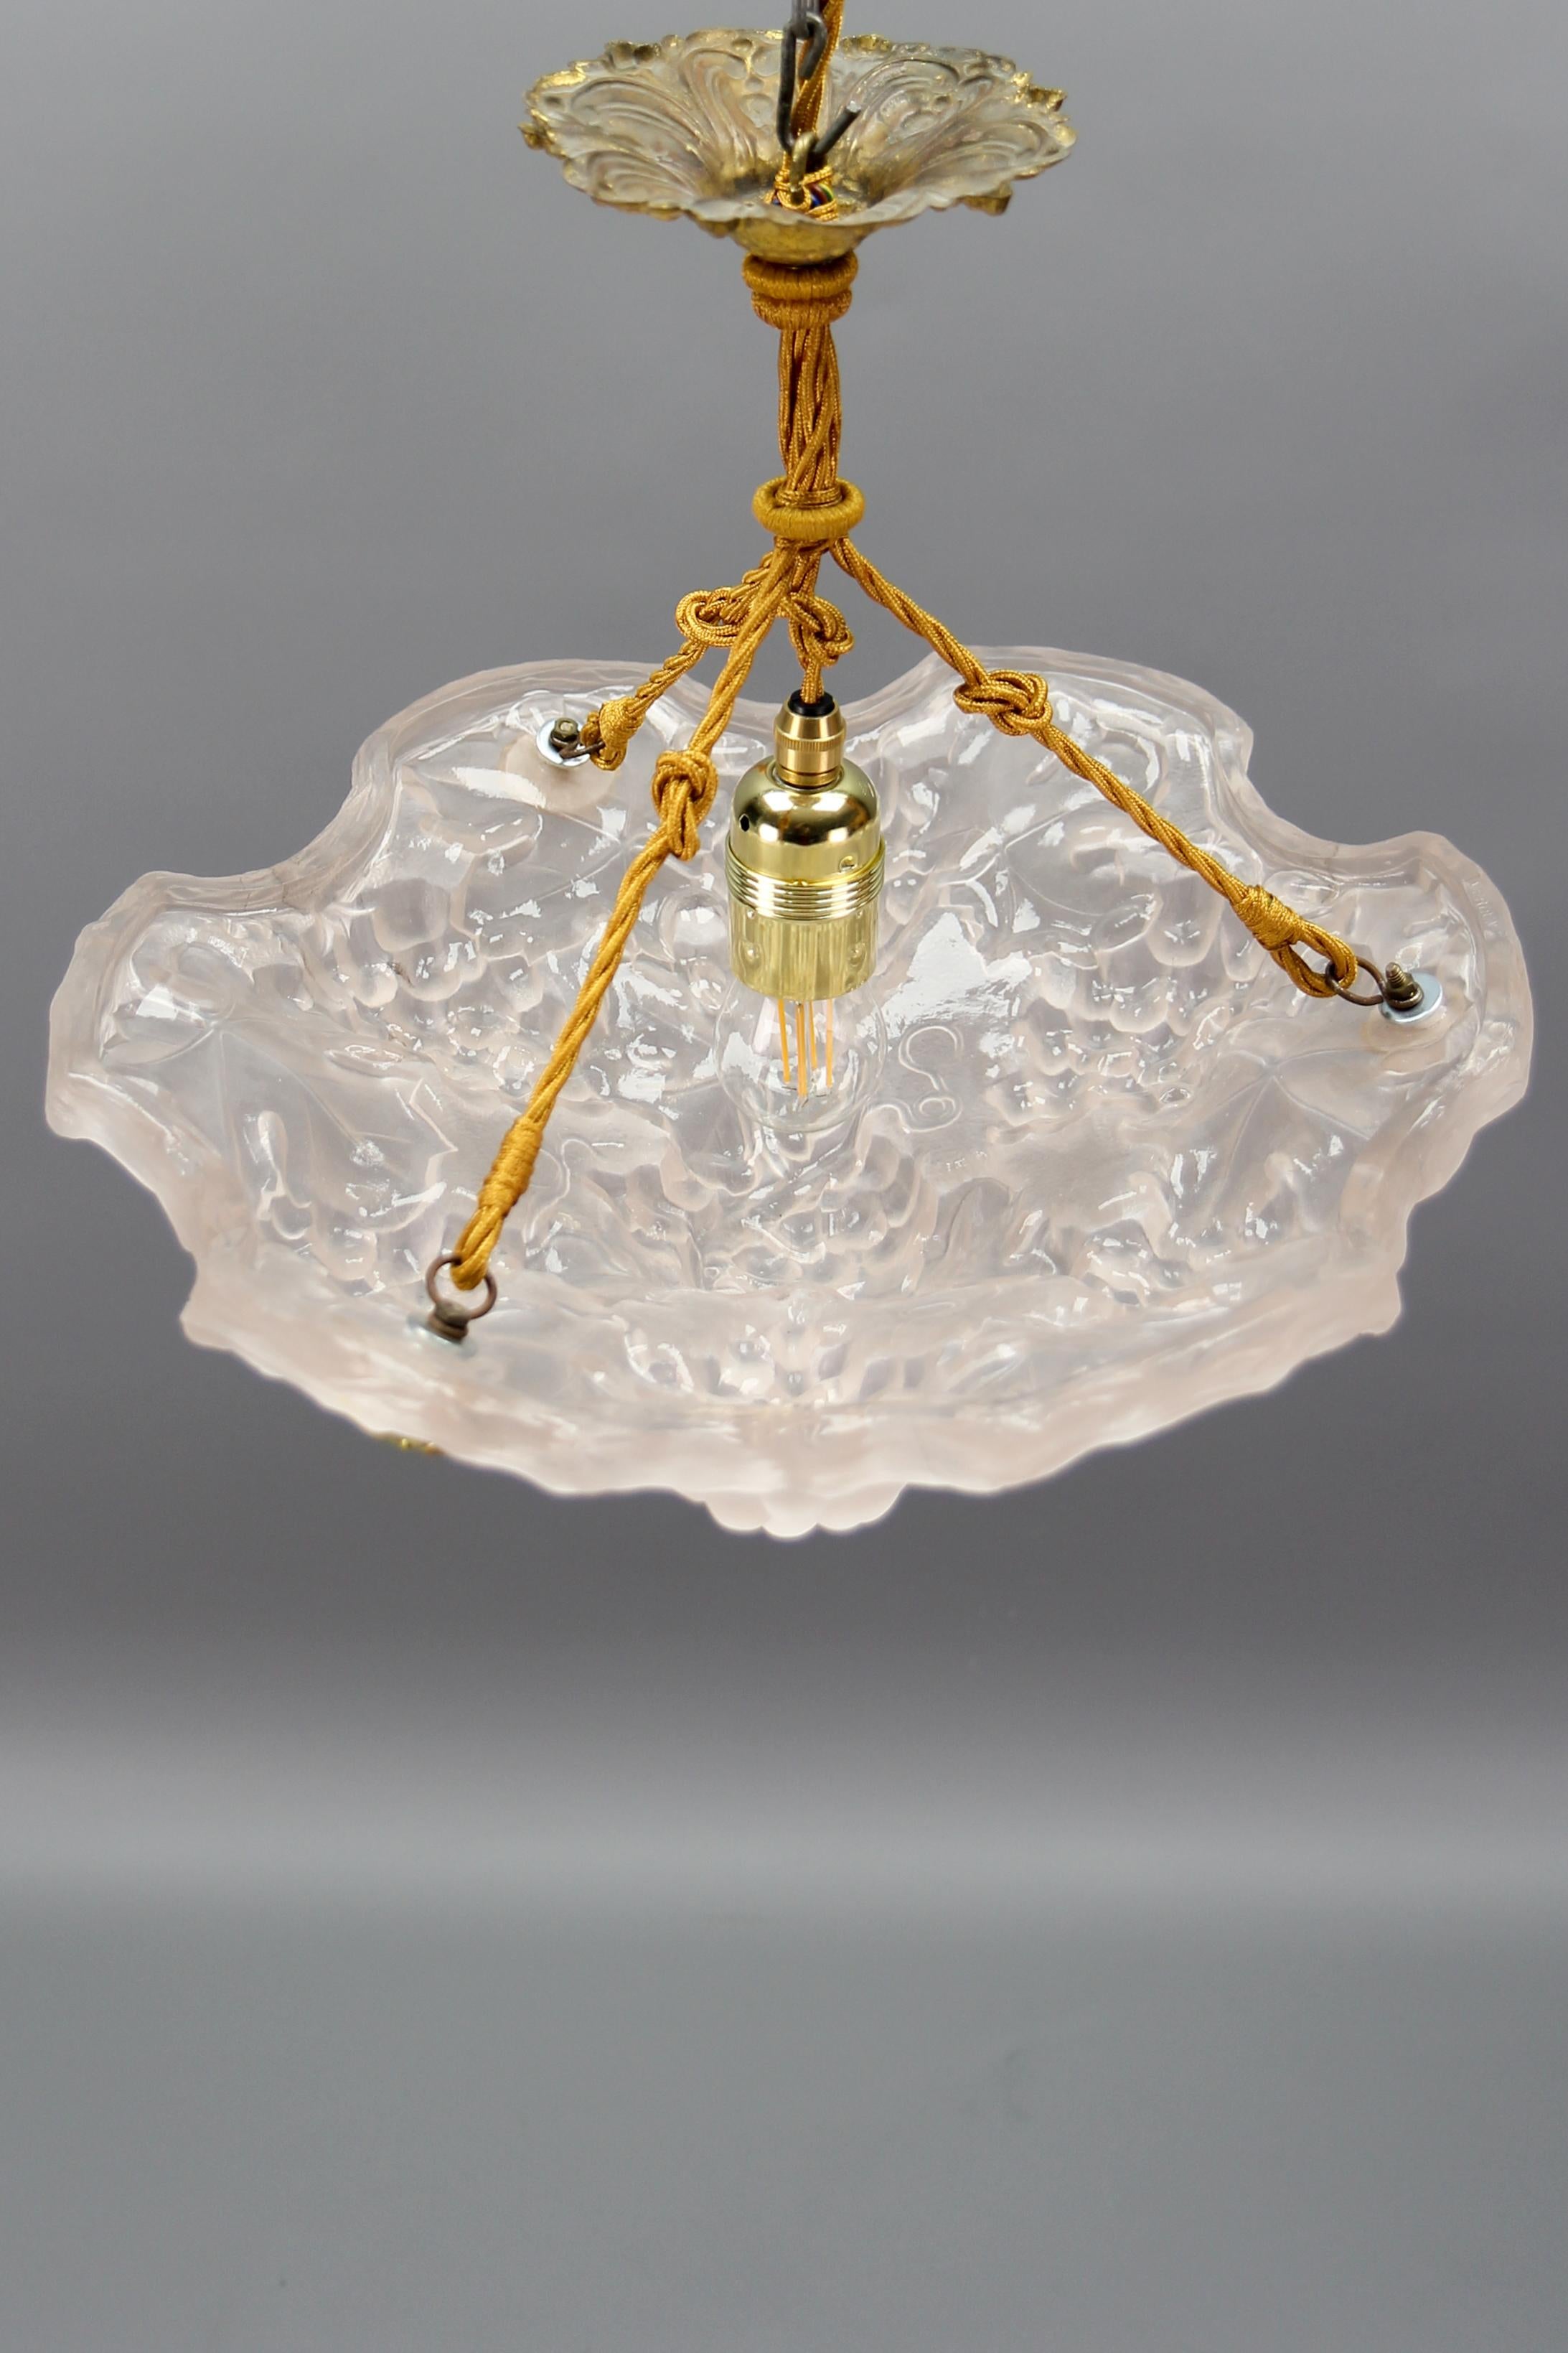 French Light Pink Frosted Glass Pendant Light with Grapes Vines by Verdun, 1930s For Sale 7